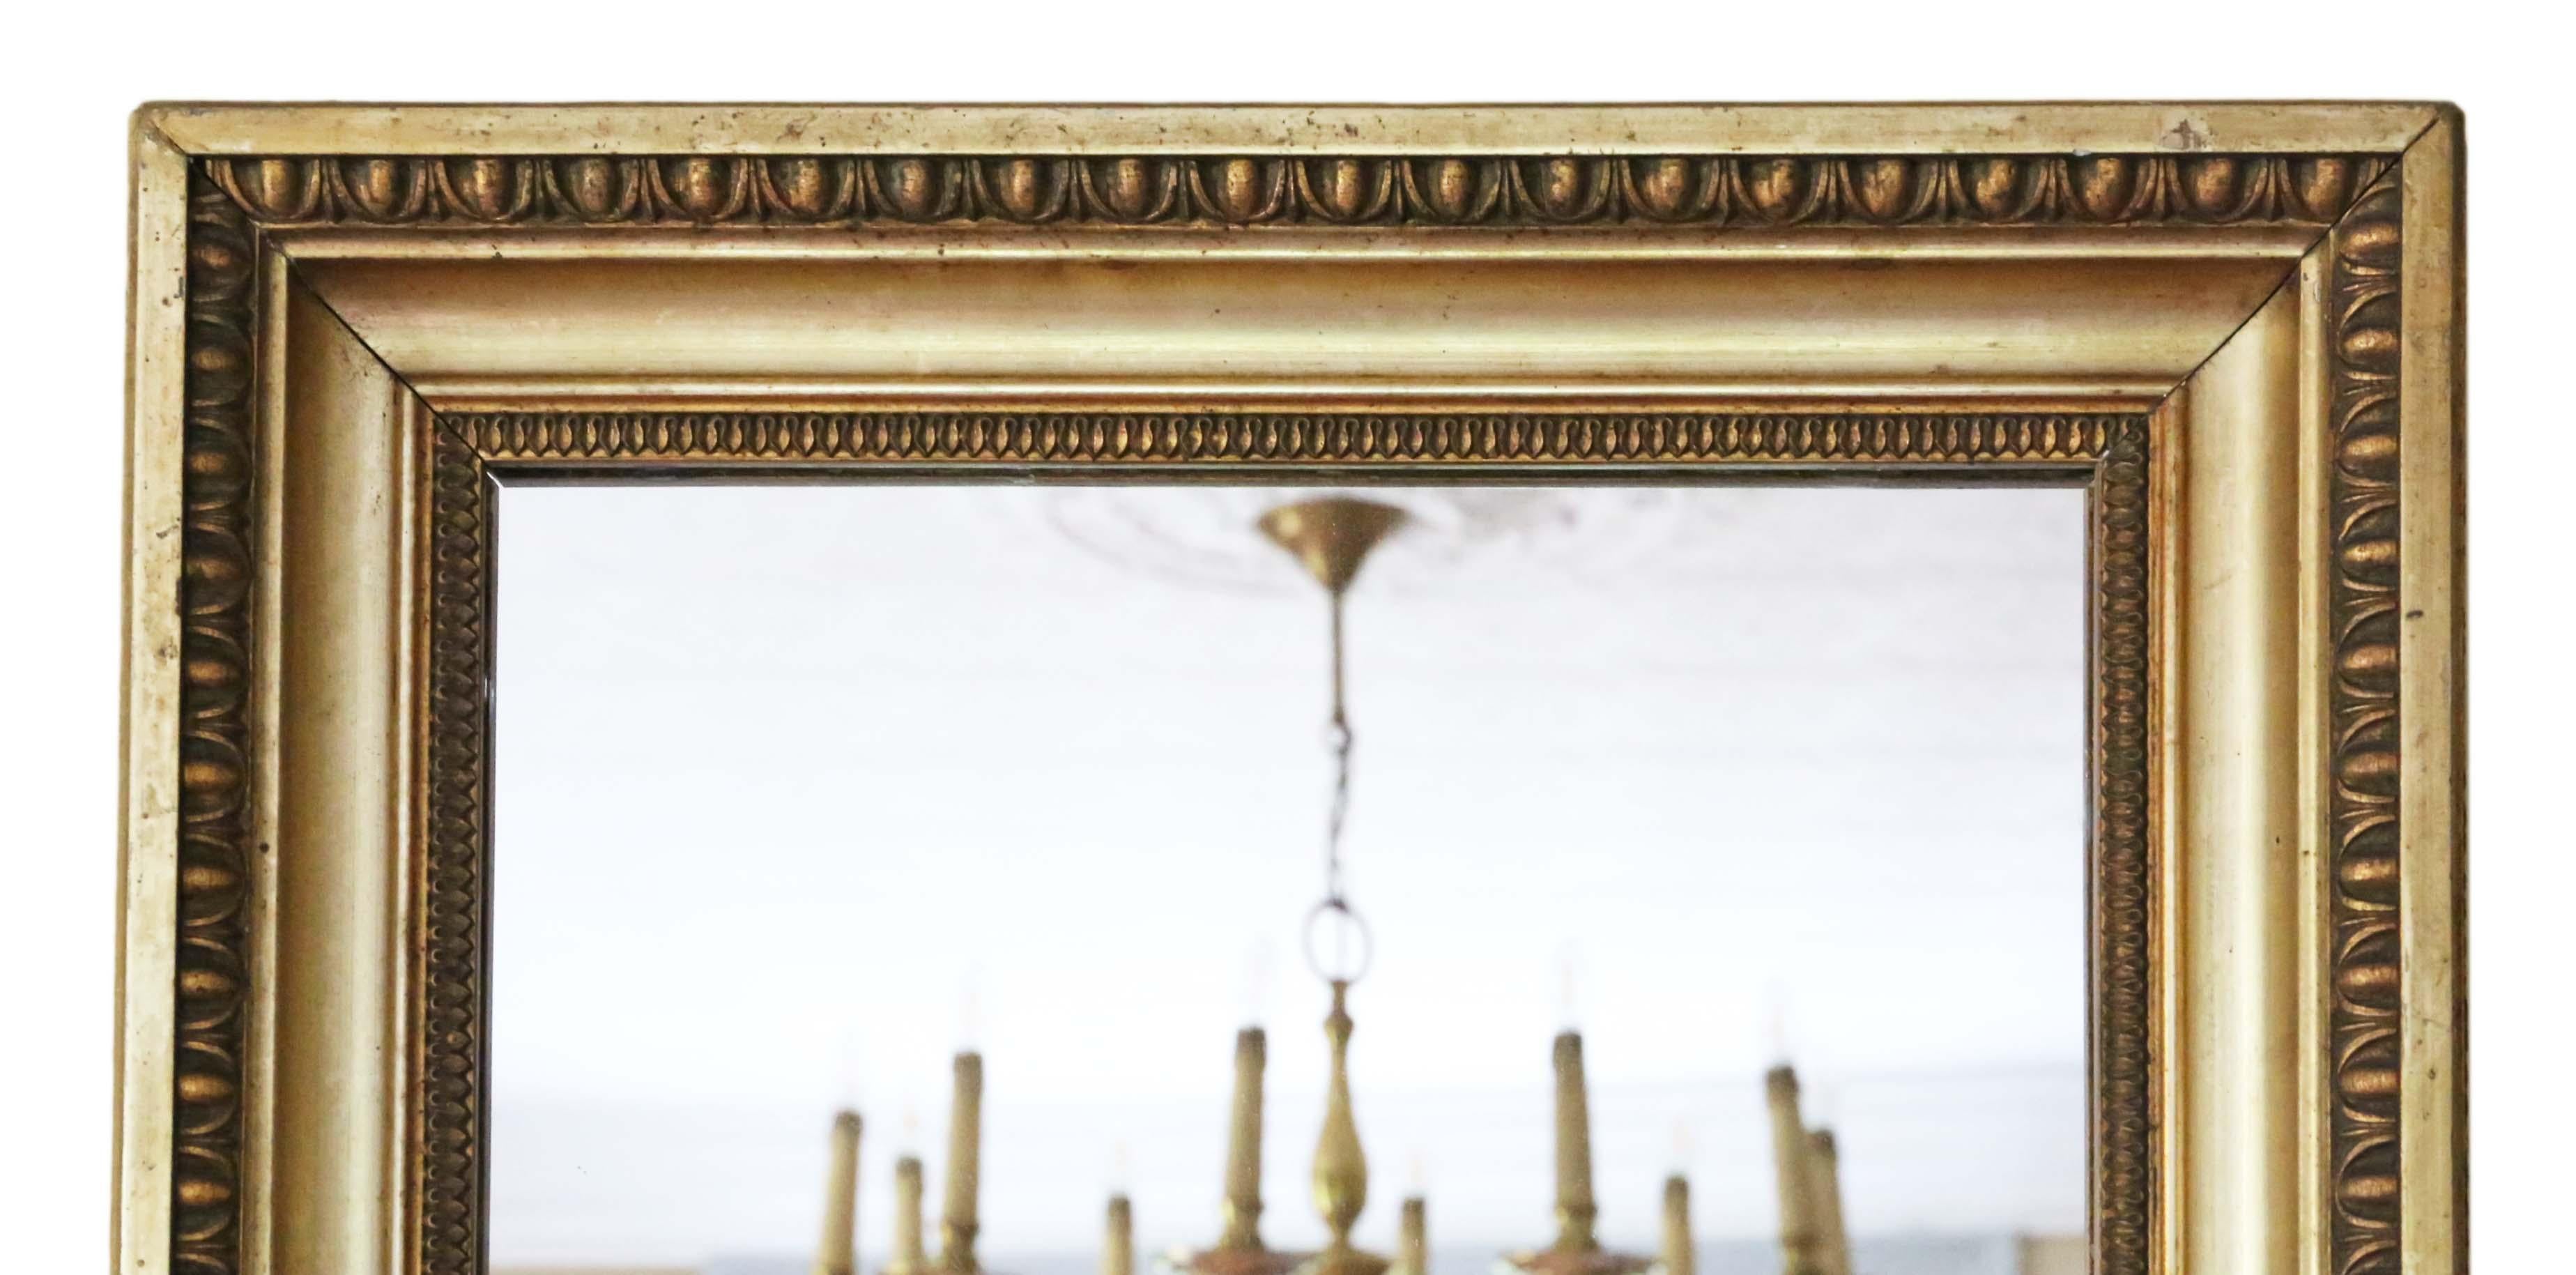 Antique large fine quality gilt wall overmantle mirror 19th Century.

An impressive and very rare find, that would look amazing in the right location. No loose joints or woodworm.

Frame has its original finish with minor decorative losses,